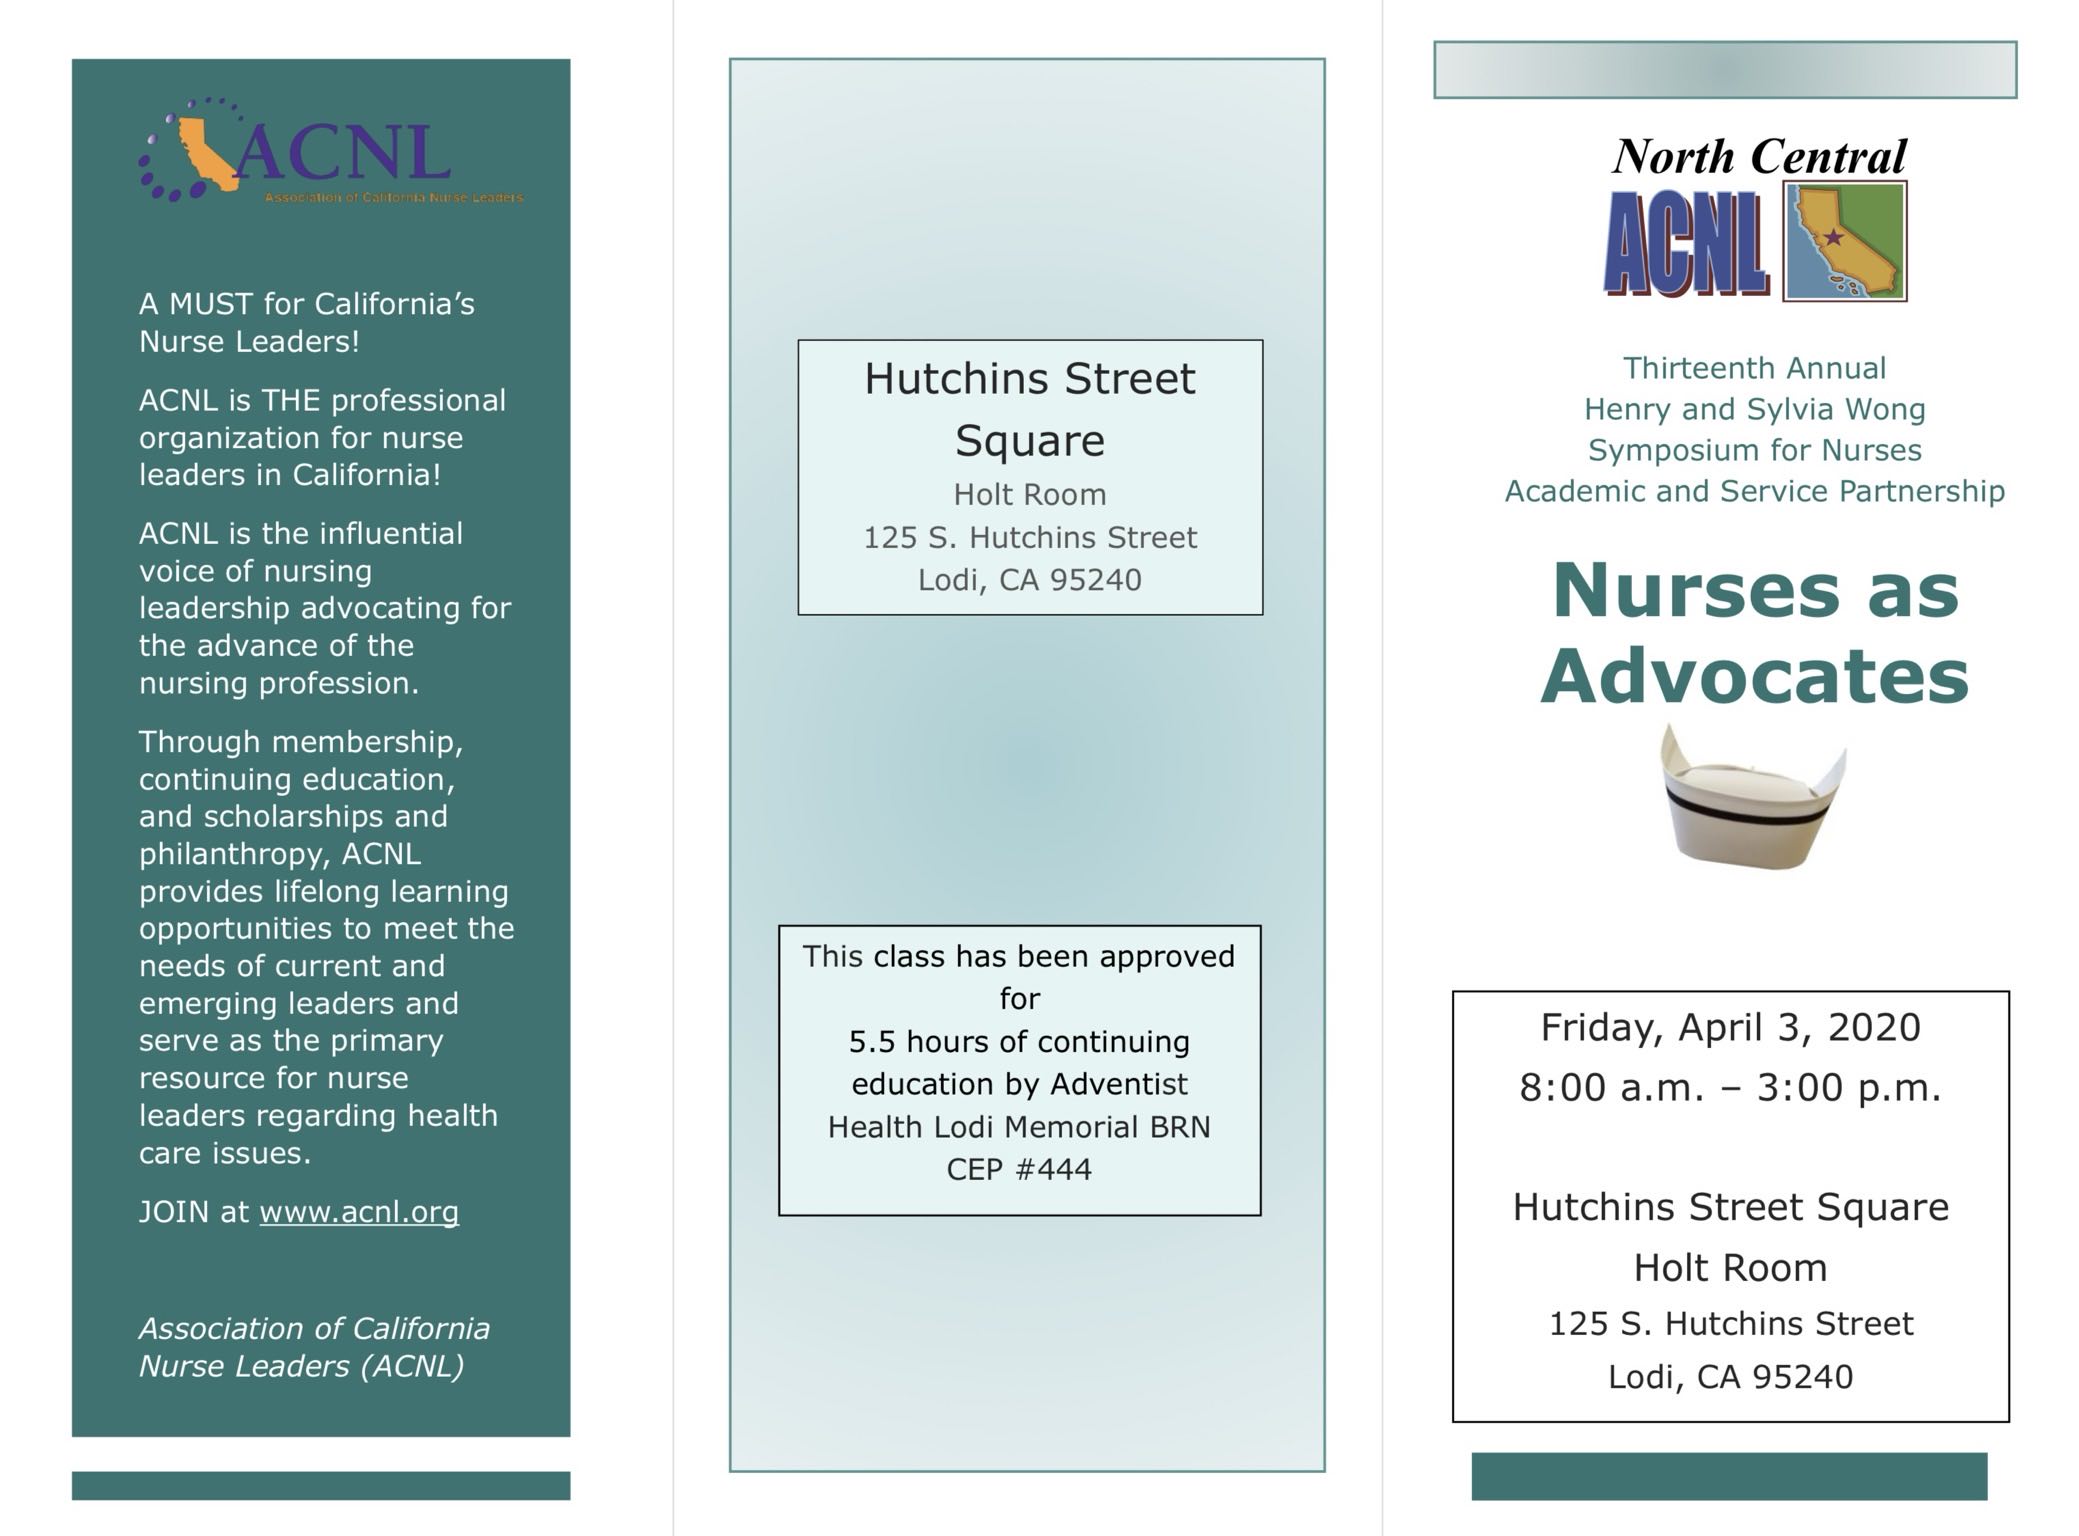 13th Annual Henry and Sylvia Wong Symposium for Nurses